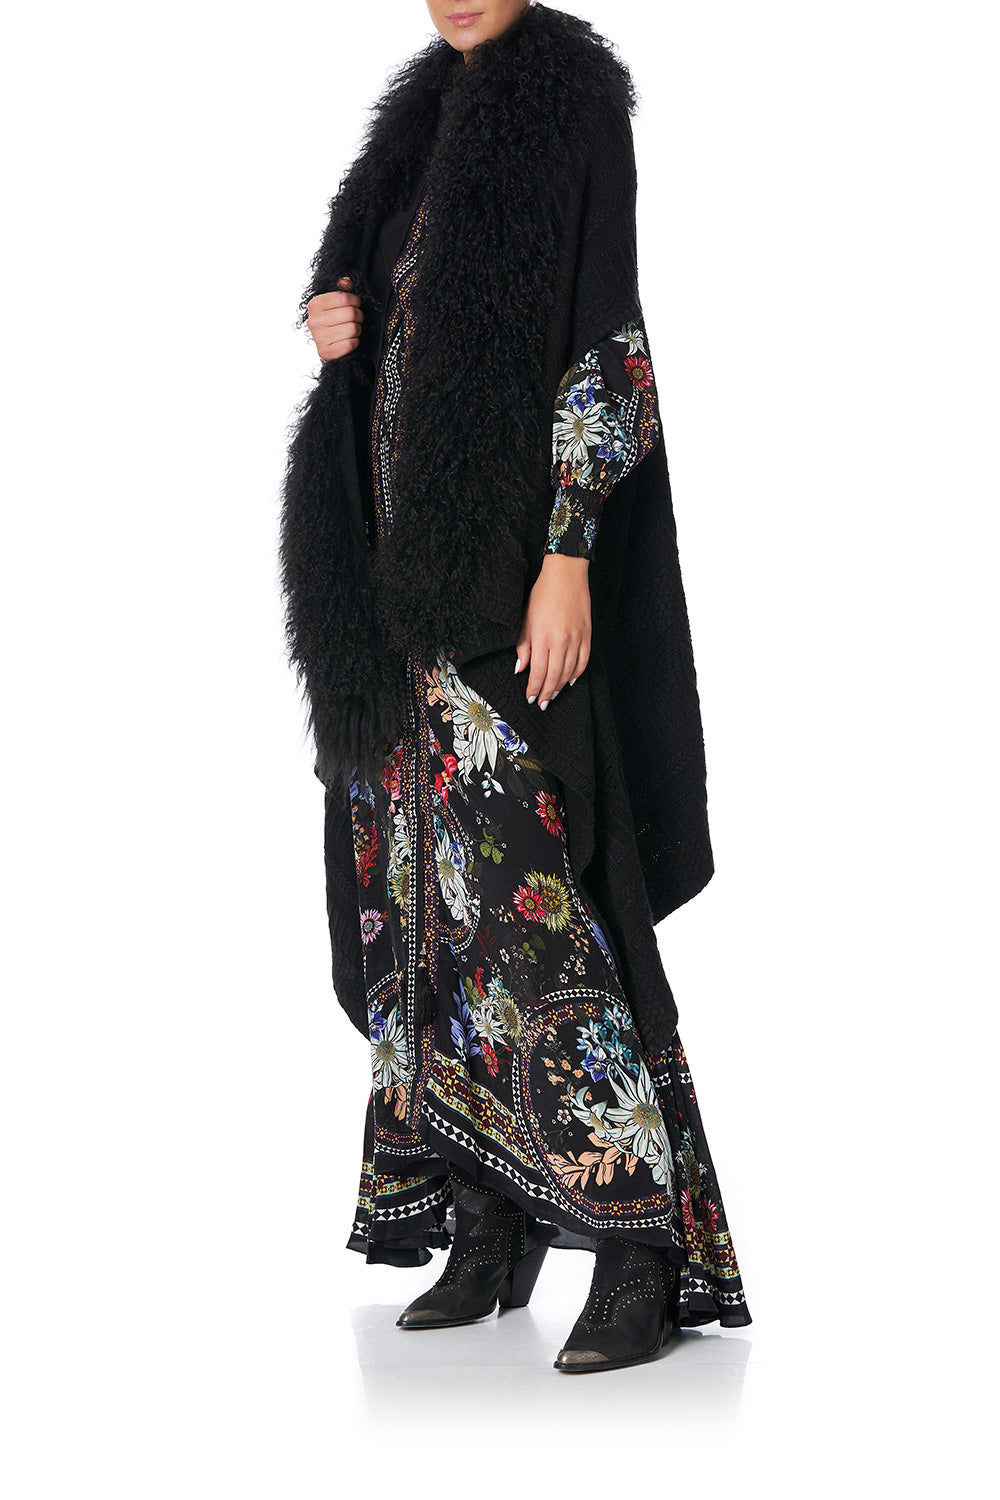 SHEARLING CAPE PAVED IN PAISLEY